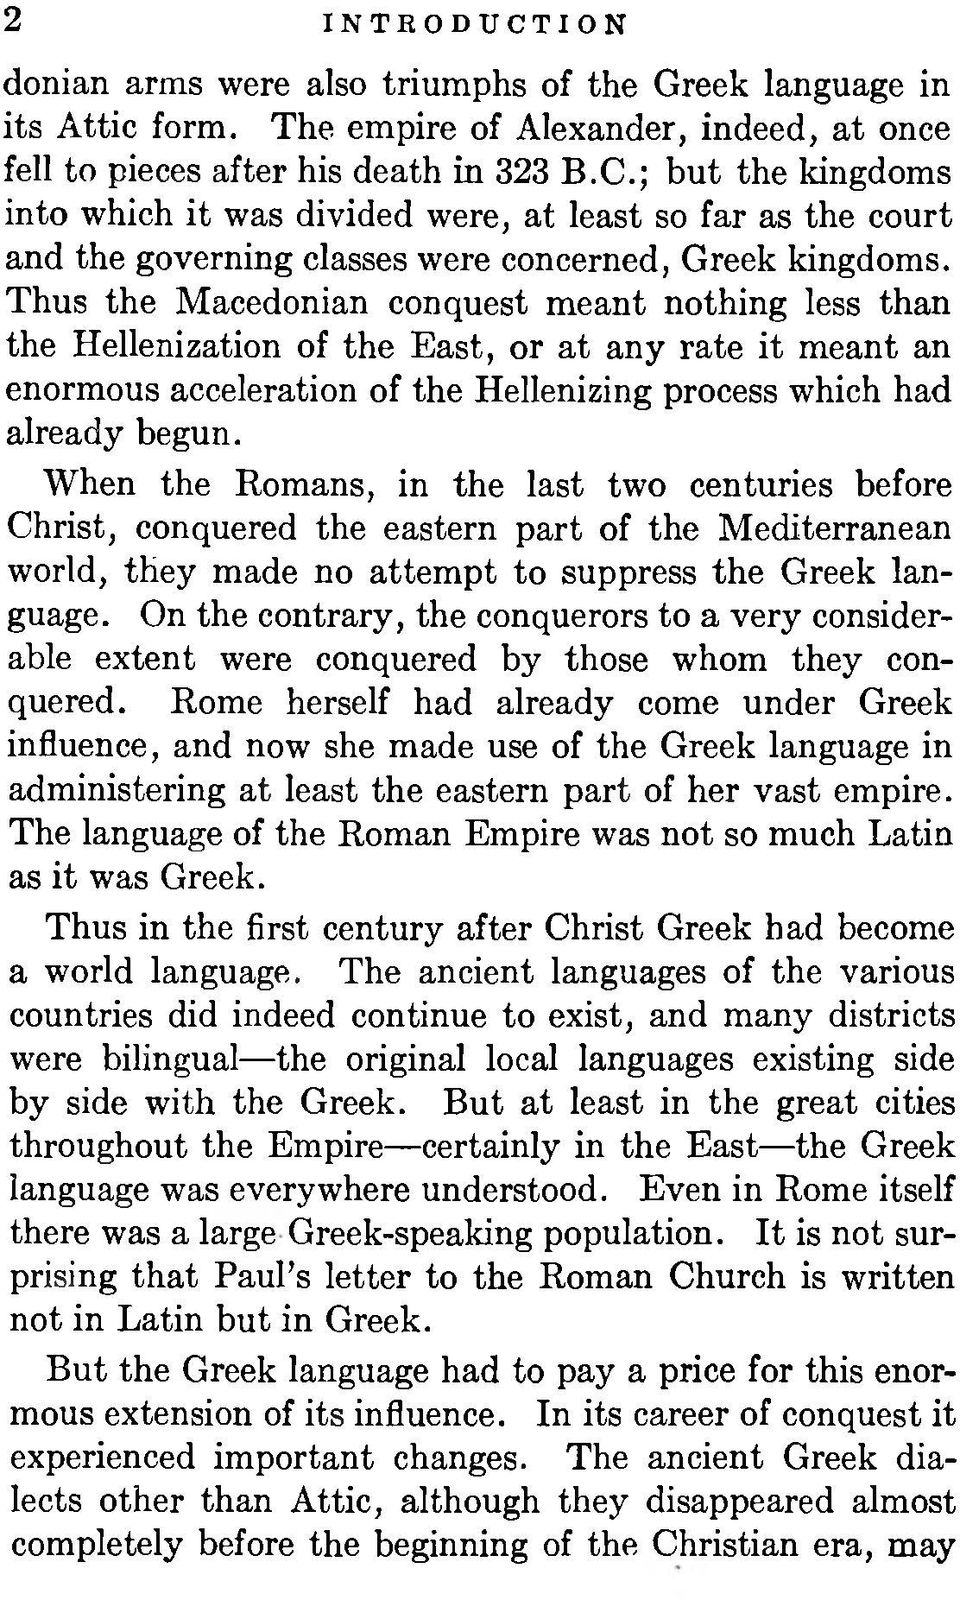 When the Romans, in the last two centuries before Christ, conquered the eastern part of the Mediterranean world, they made no attempt to suppress the Greek language.